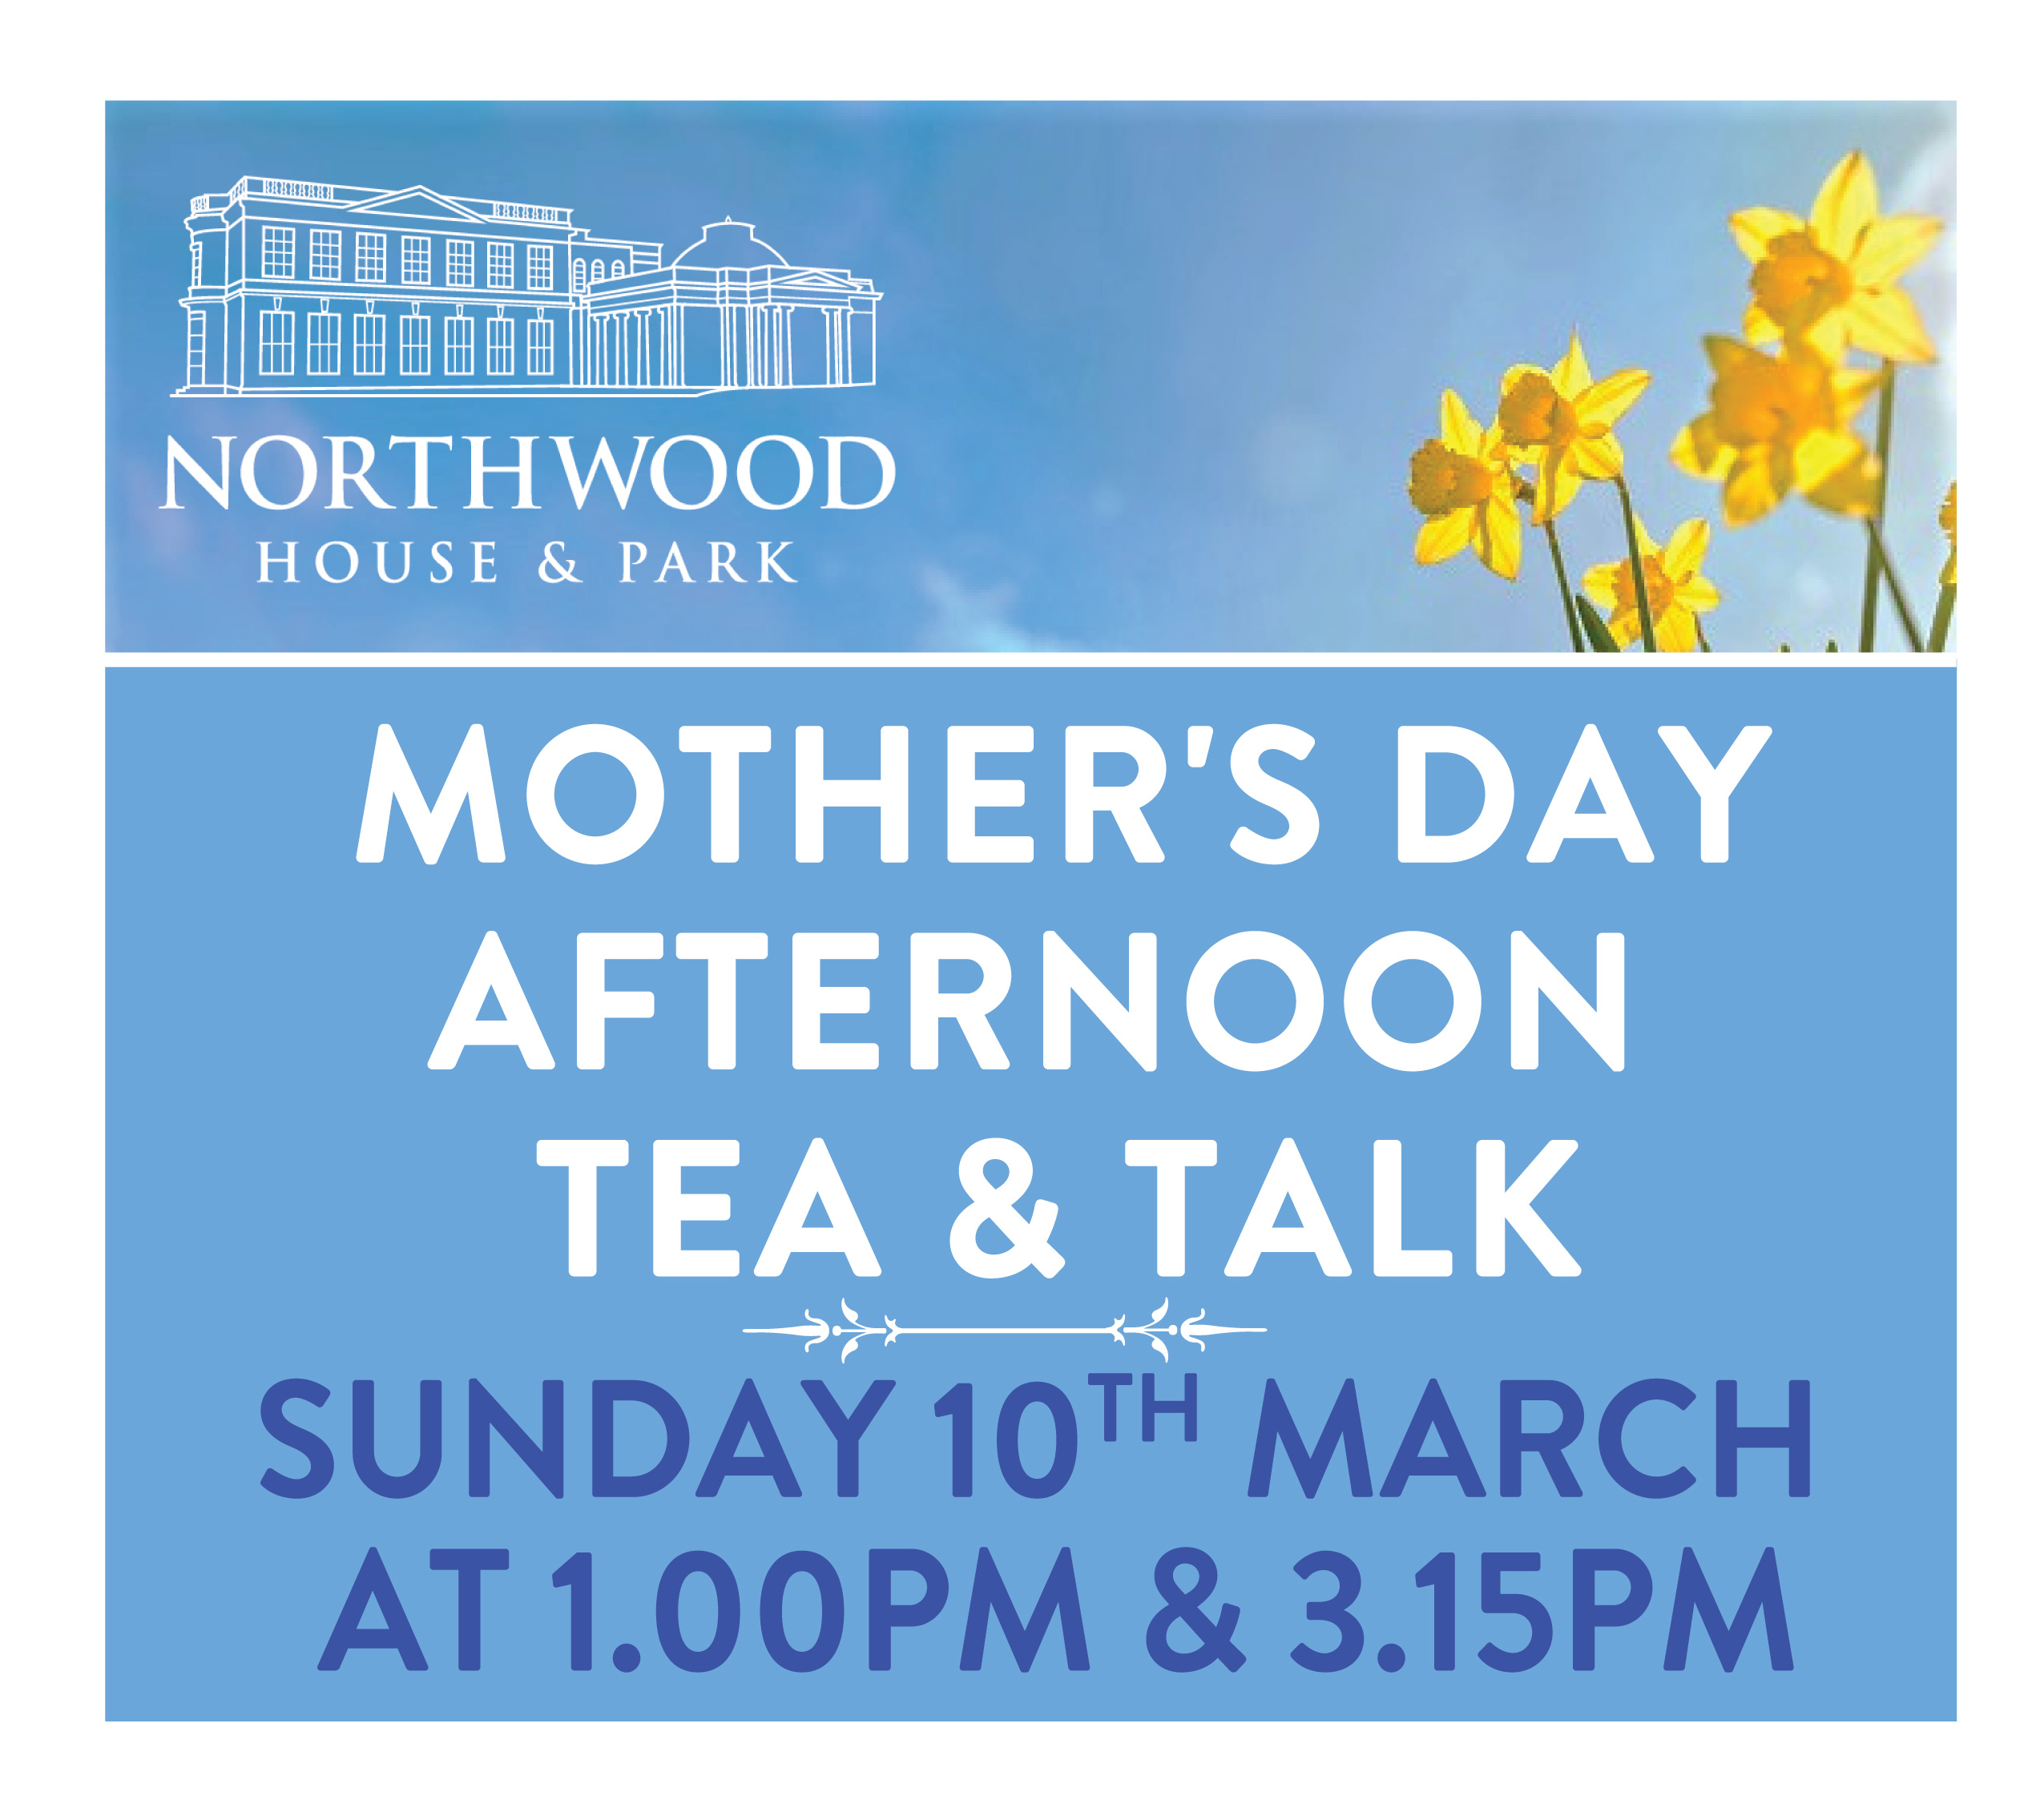 Mothers Day Afternoon Tea & Talk